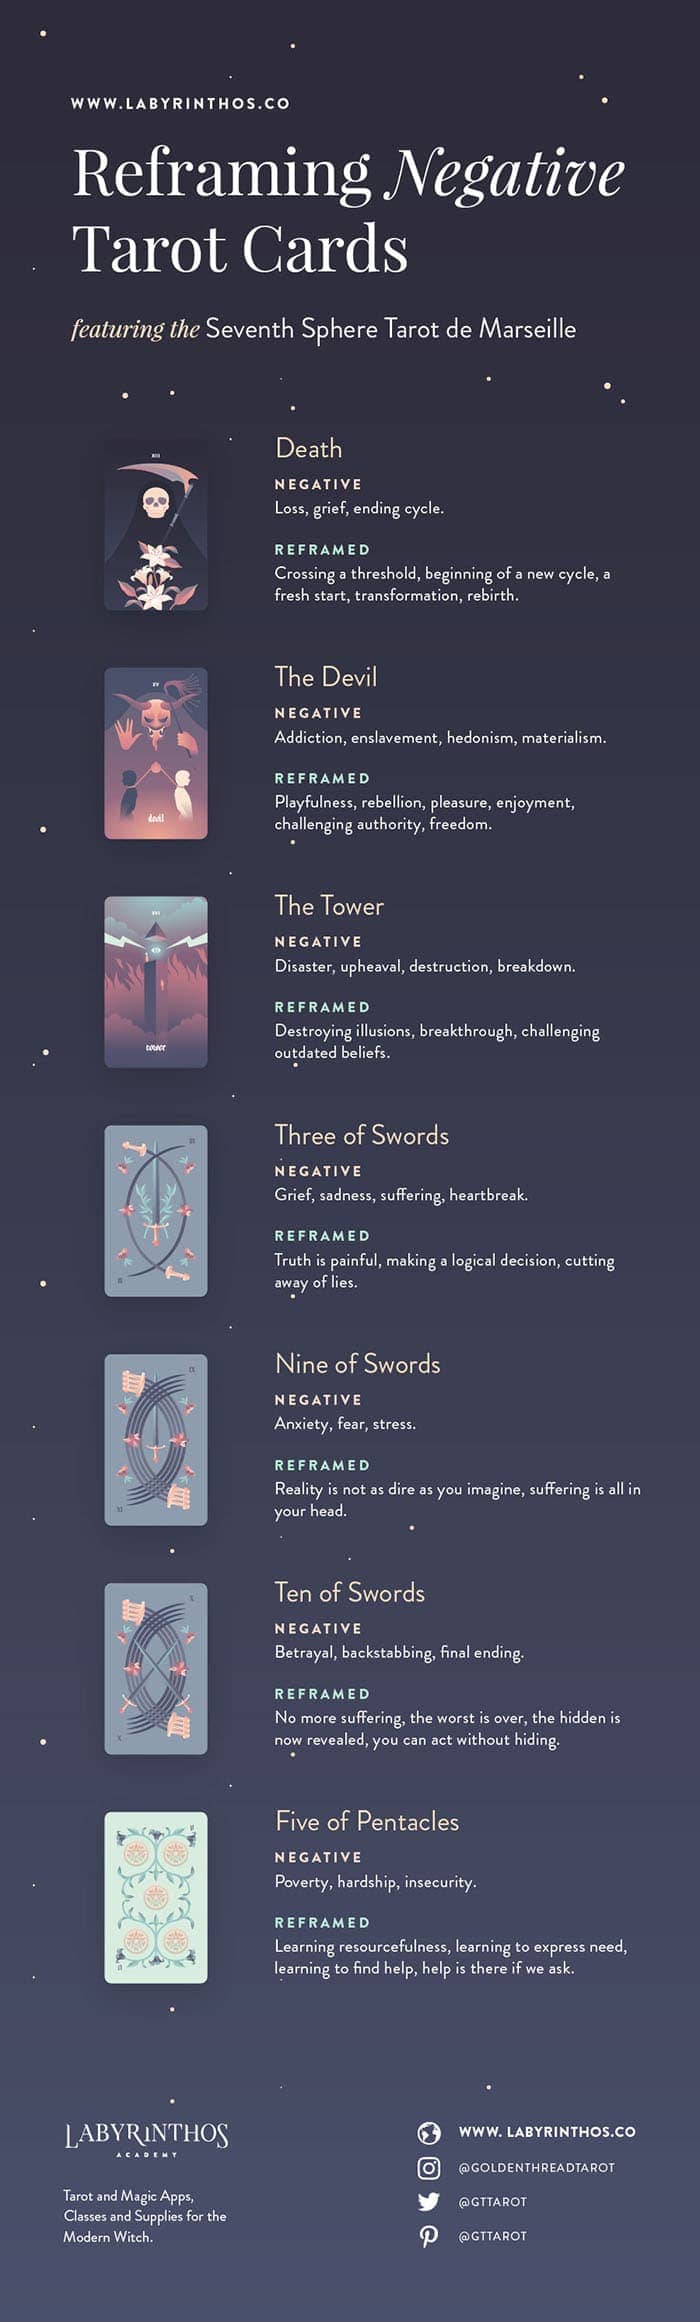 Reframing Negative Tarot Cards and Scary Tarot Cards - Full Infographic